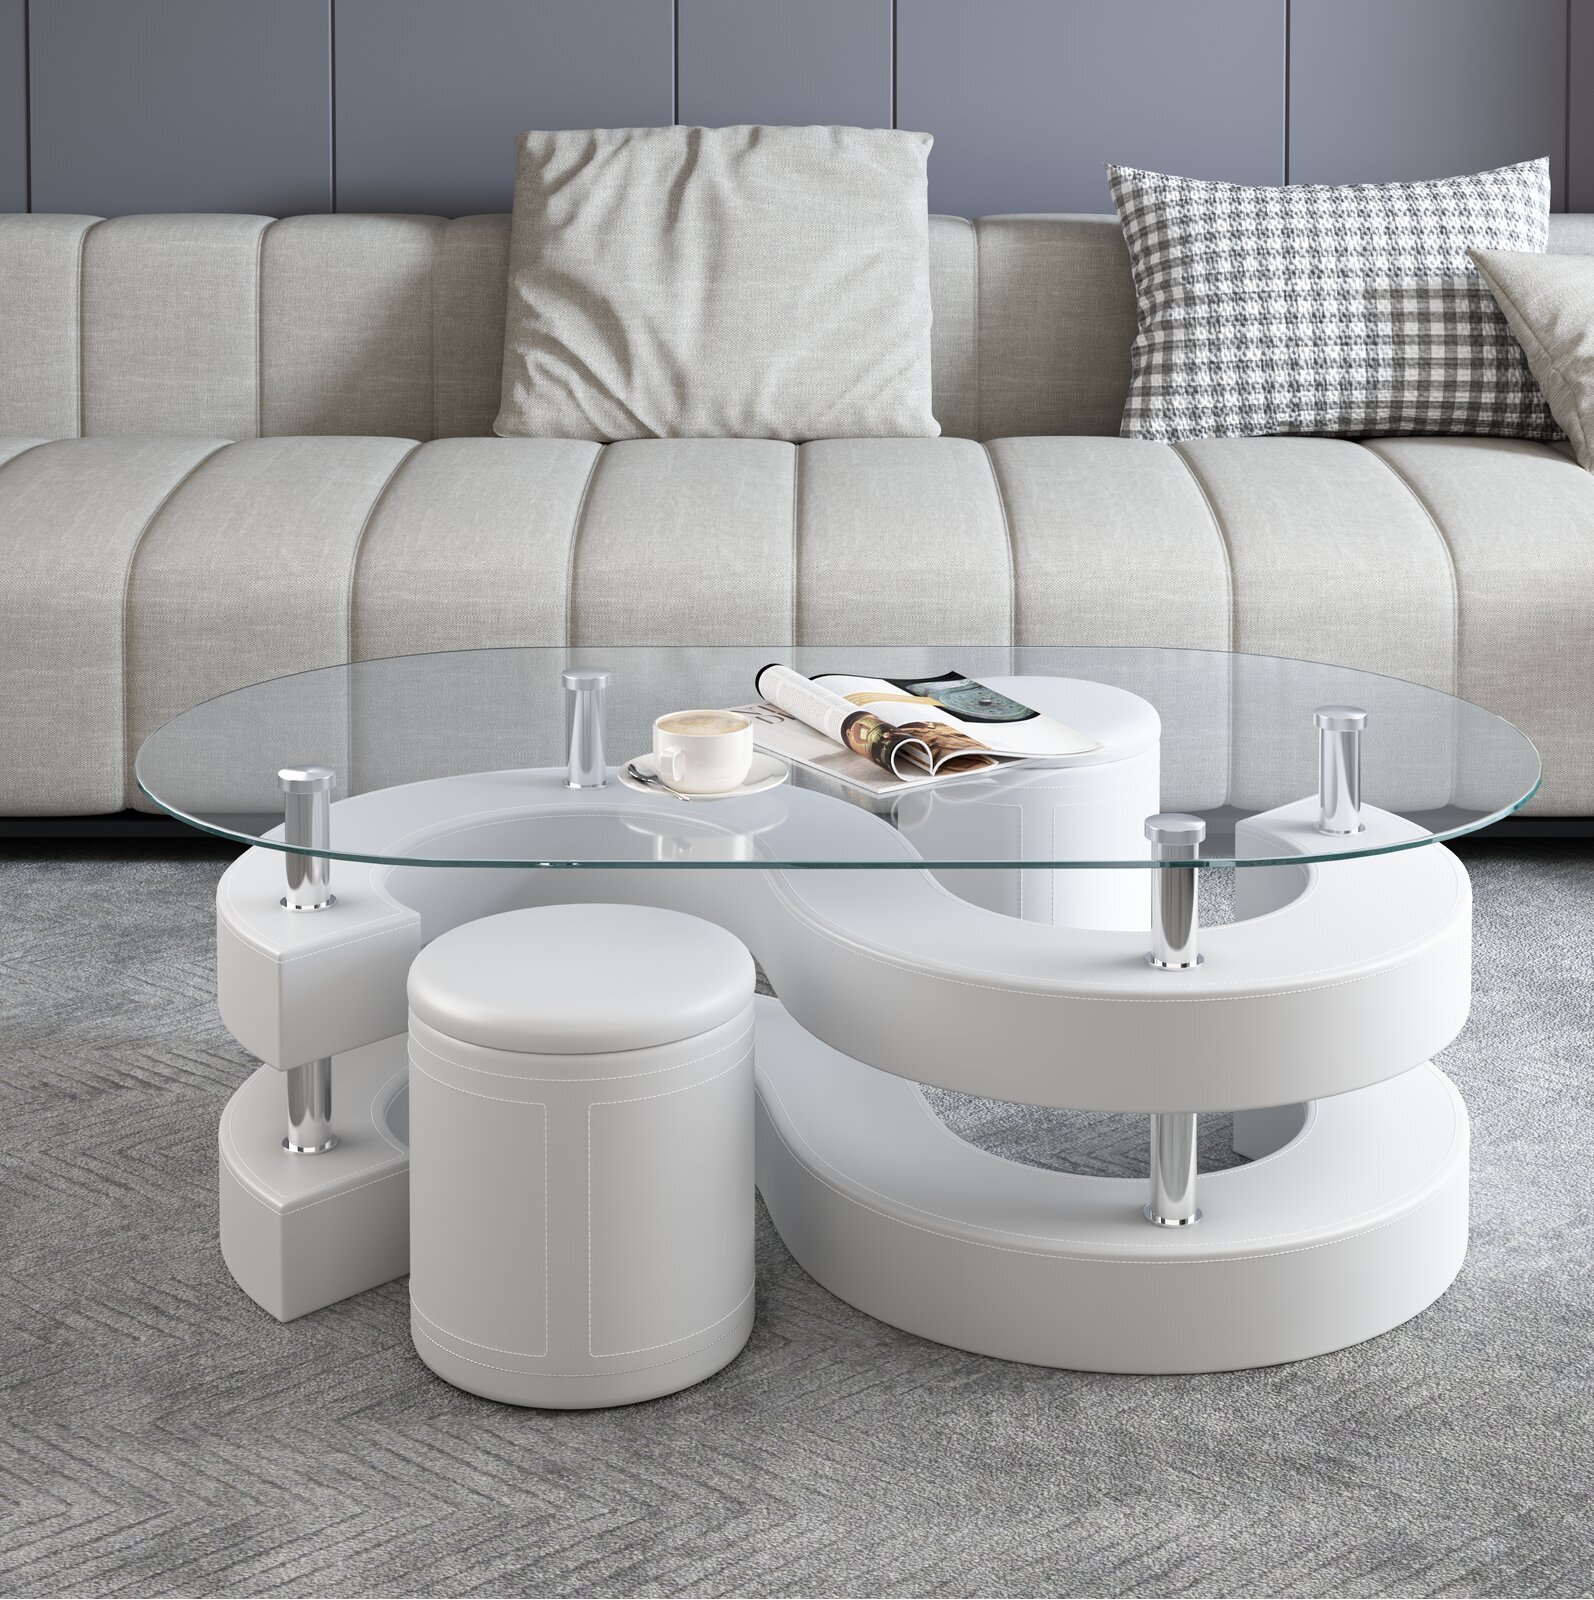 Abstract S shaped coffee table with poufs for seating